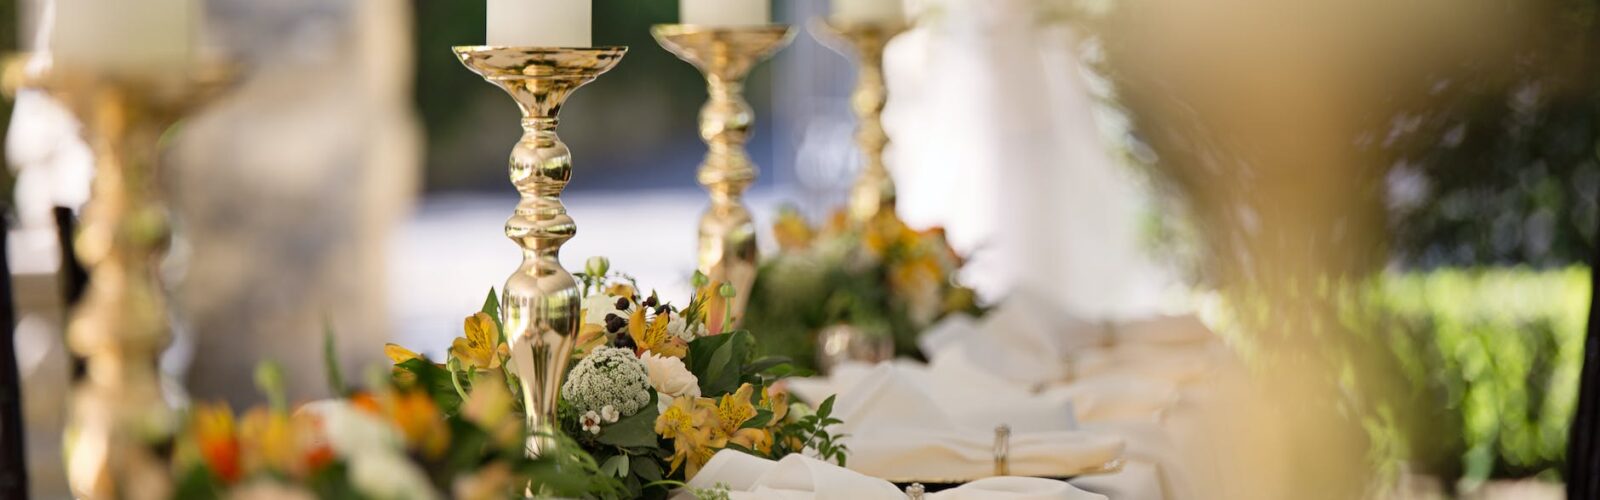 selective focus of candlesticks on table with wedding set up